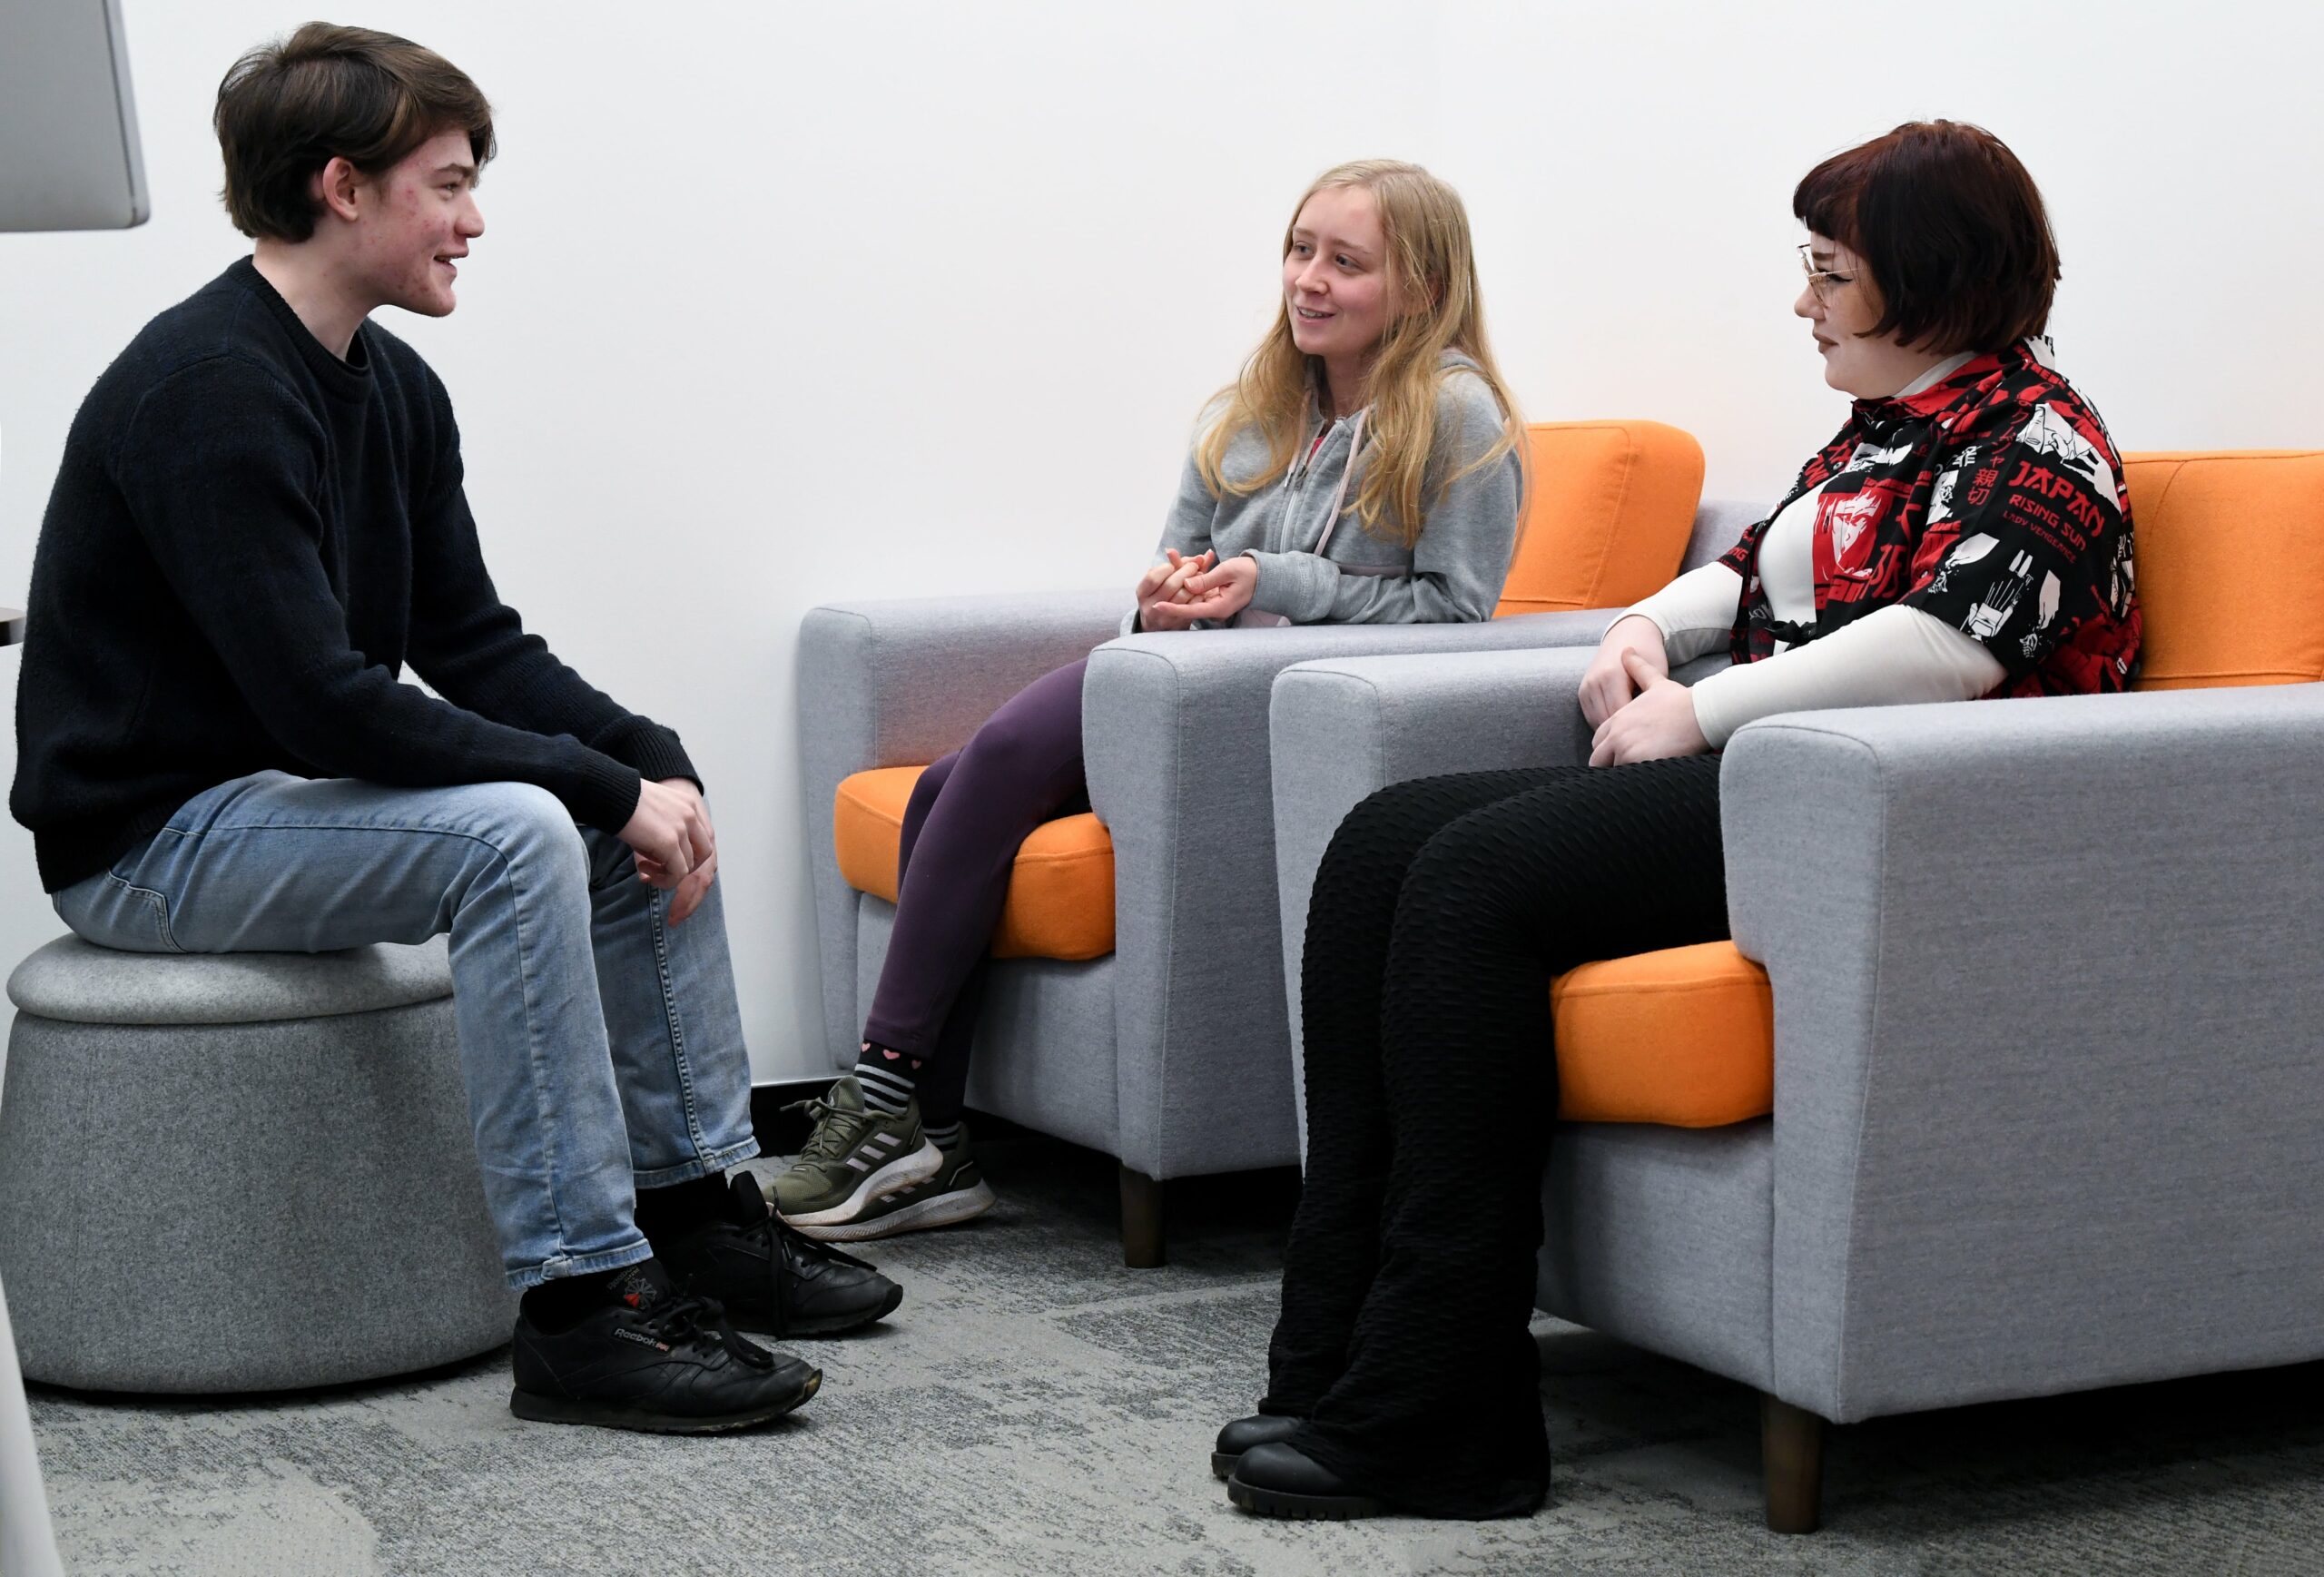 3 students talking together in a communal space